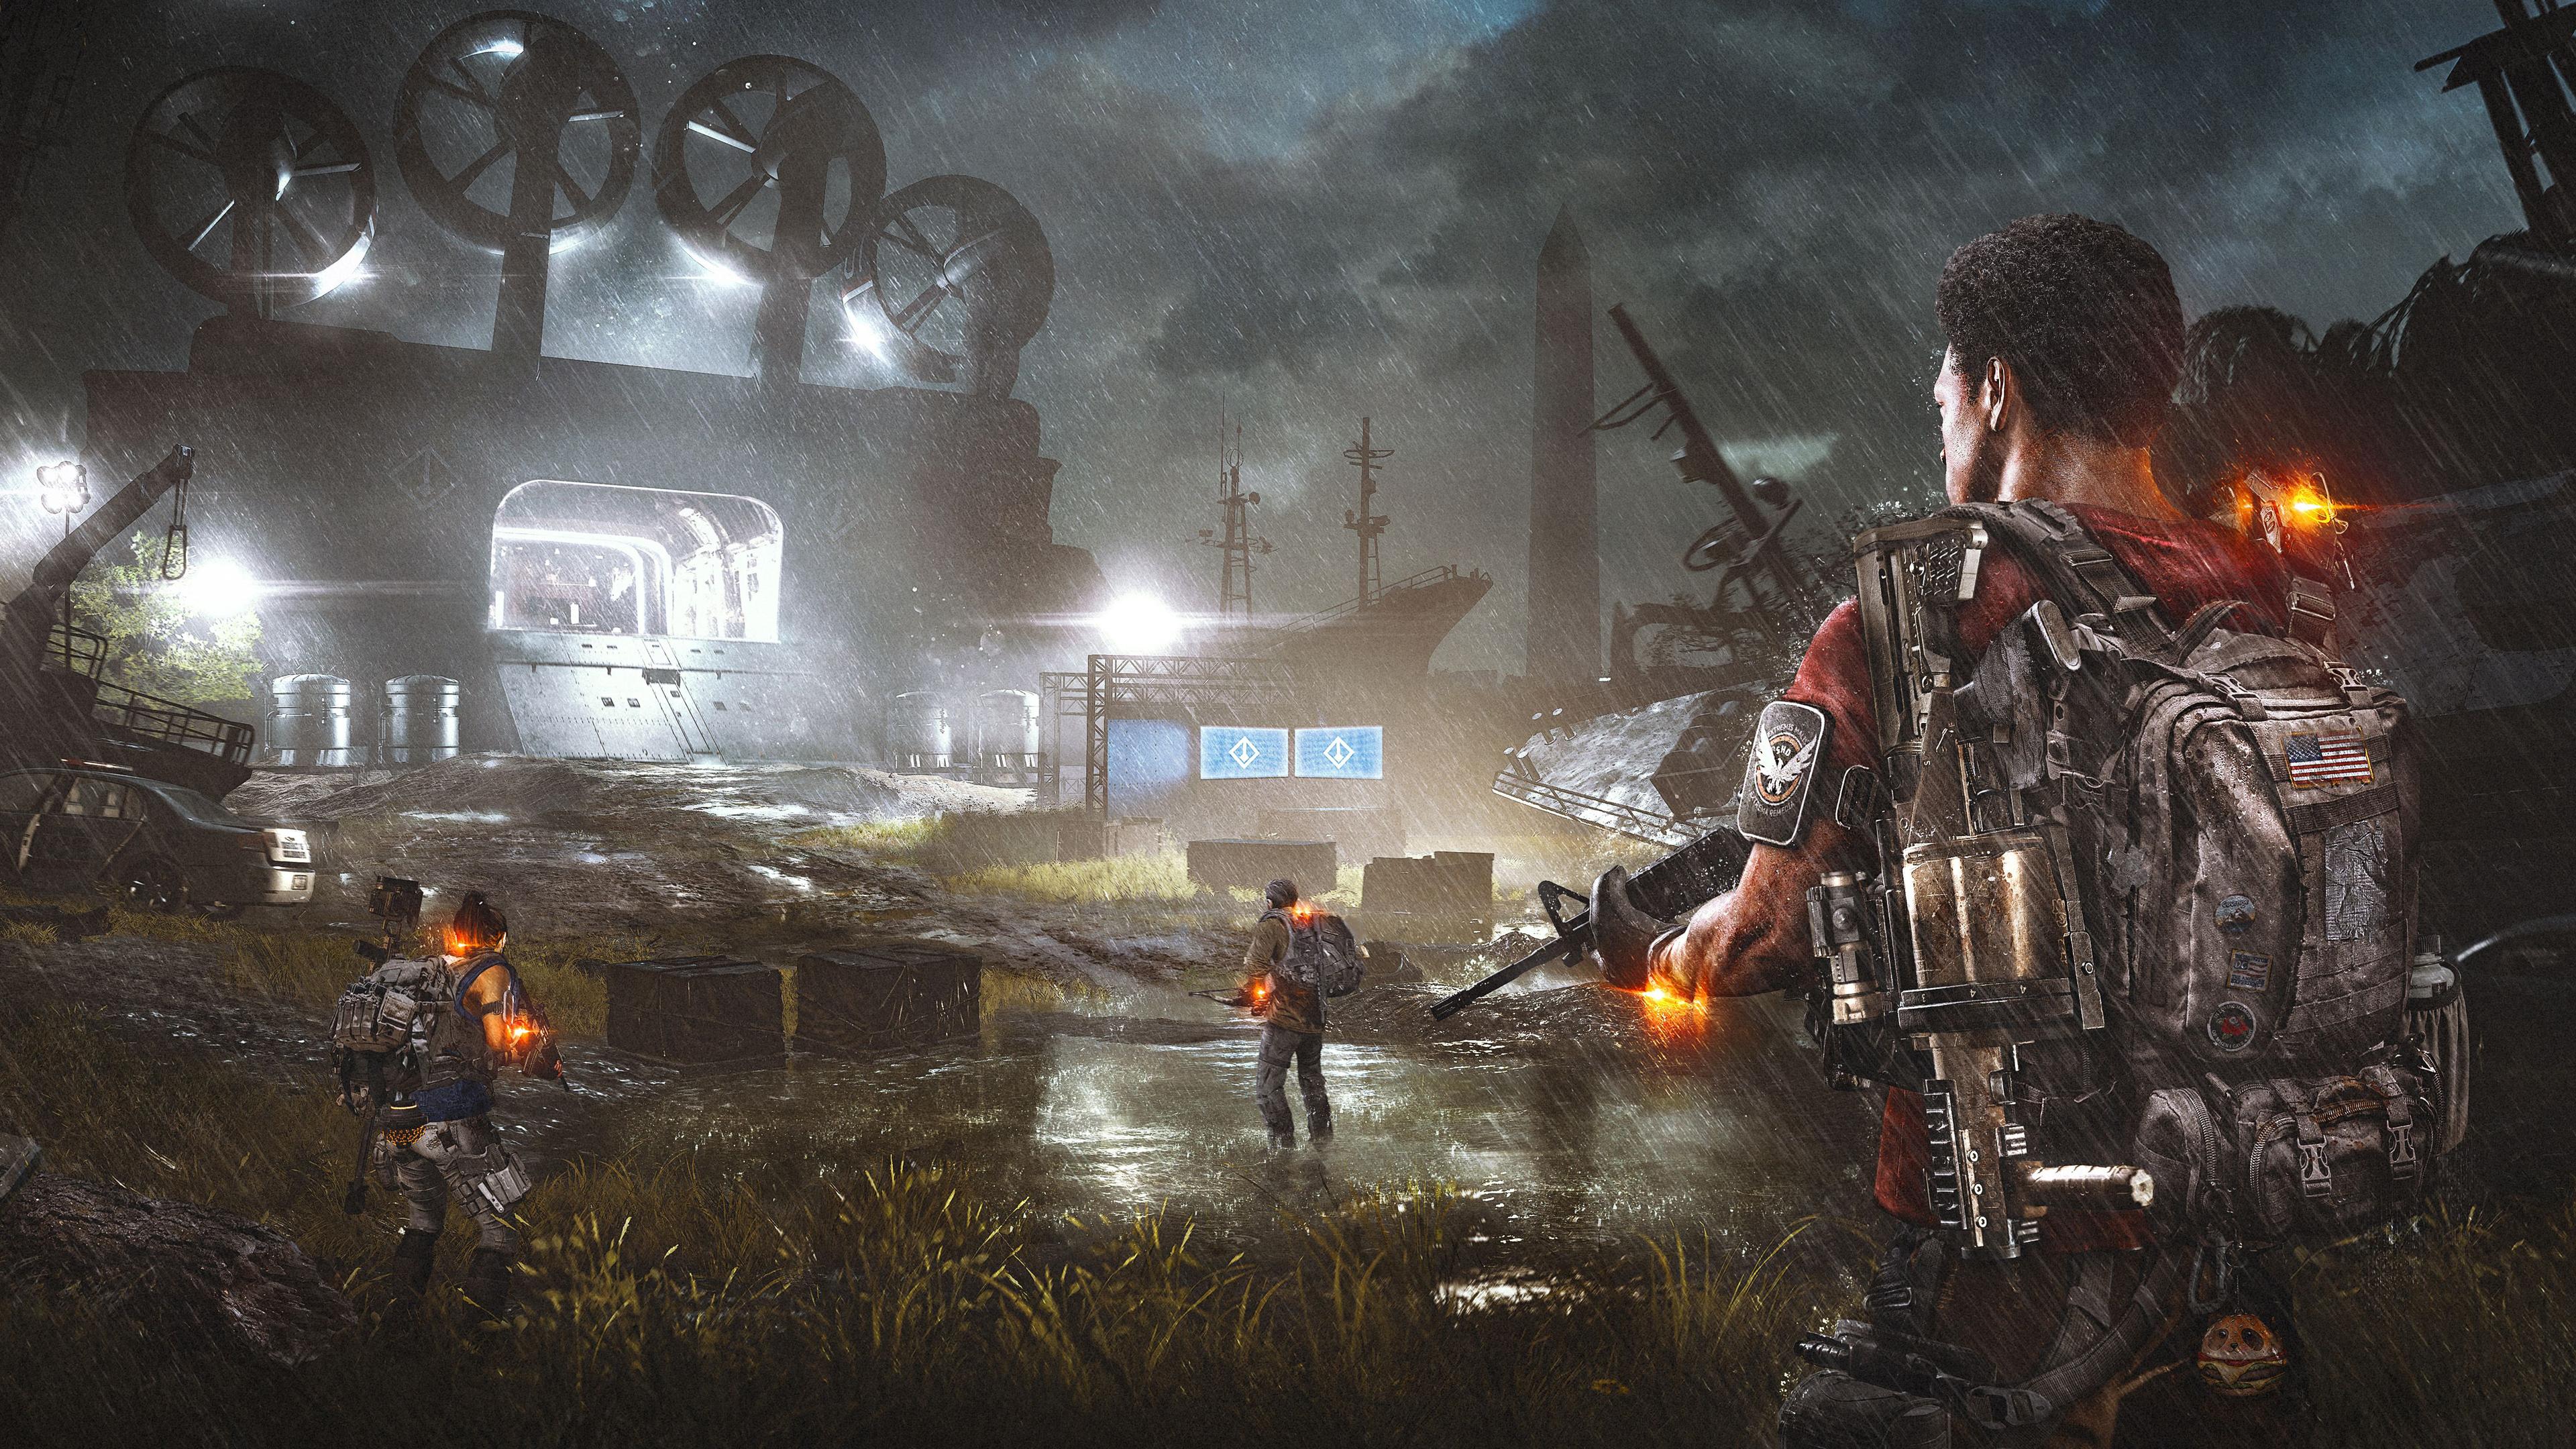 Wallpaper 4k Tom Clancys The Division 2 Invasion 4k 2019 games